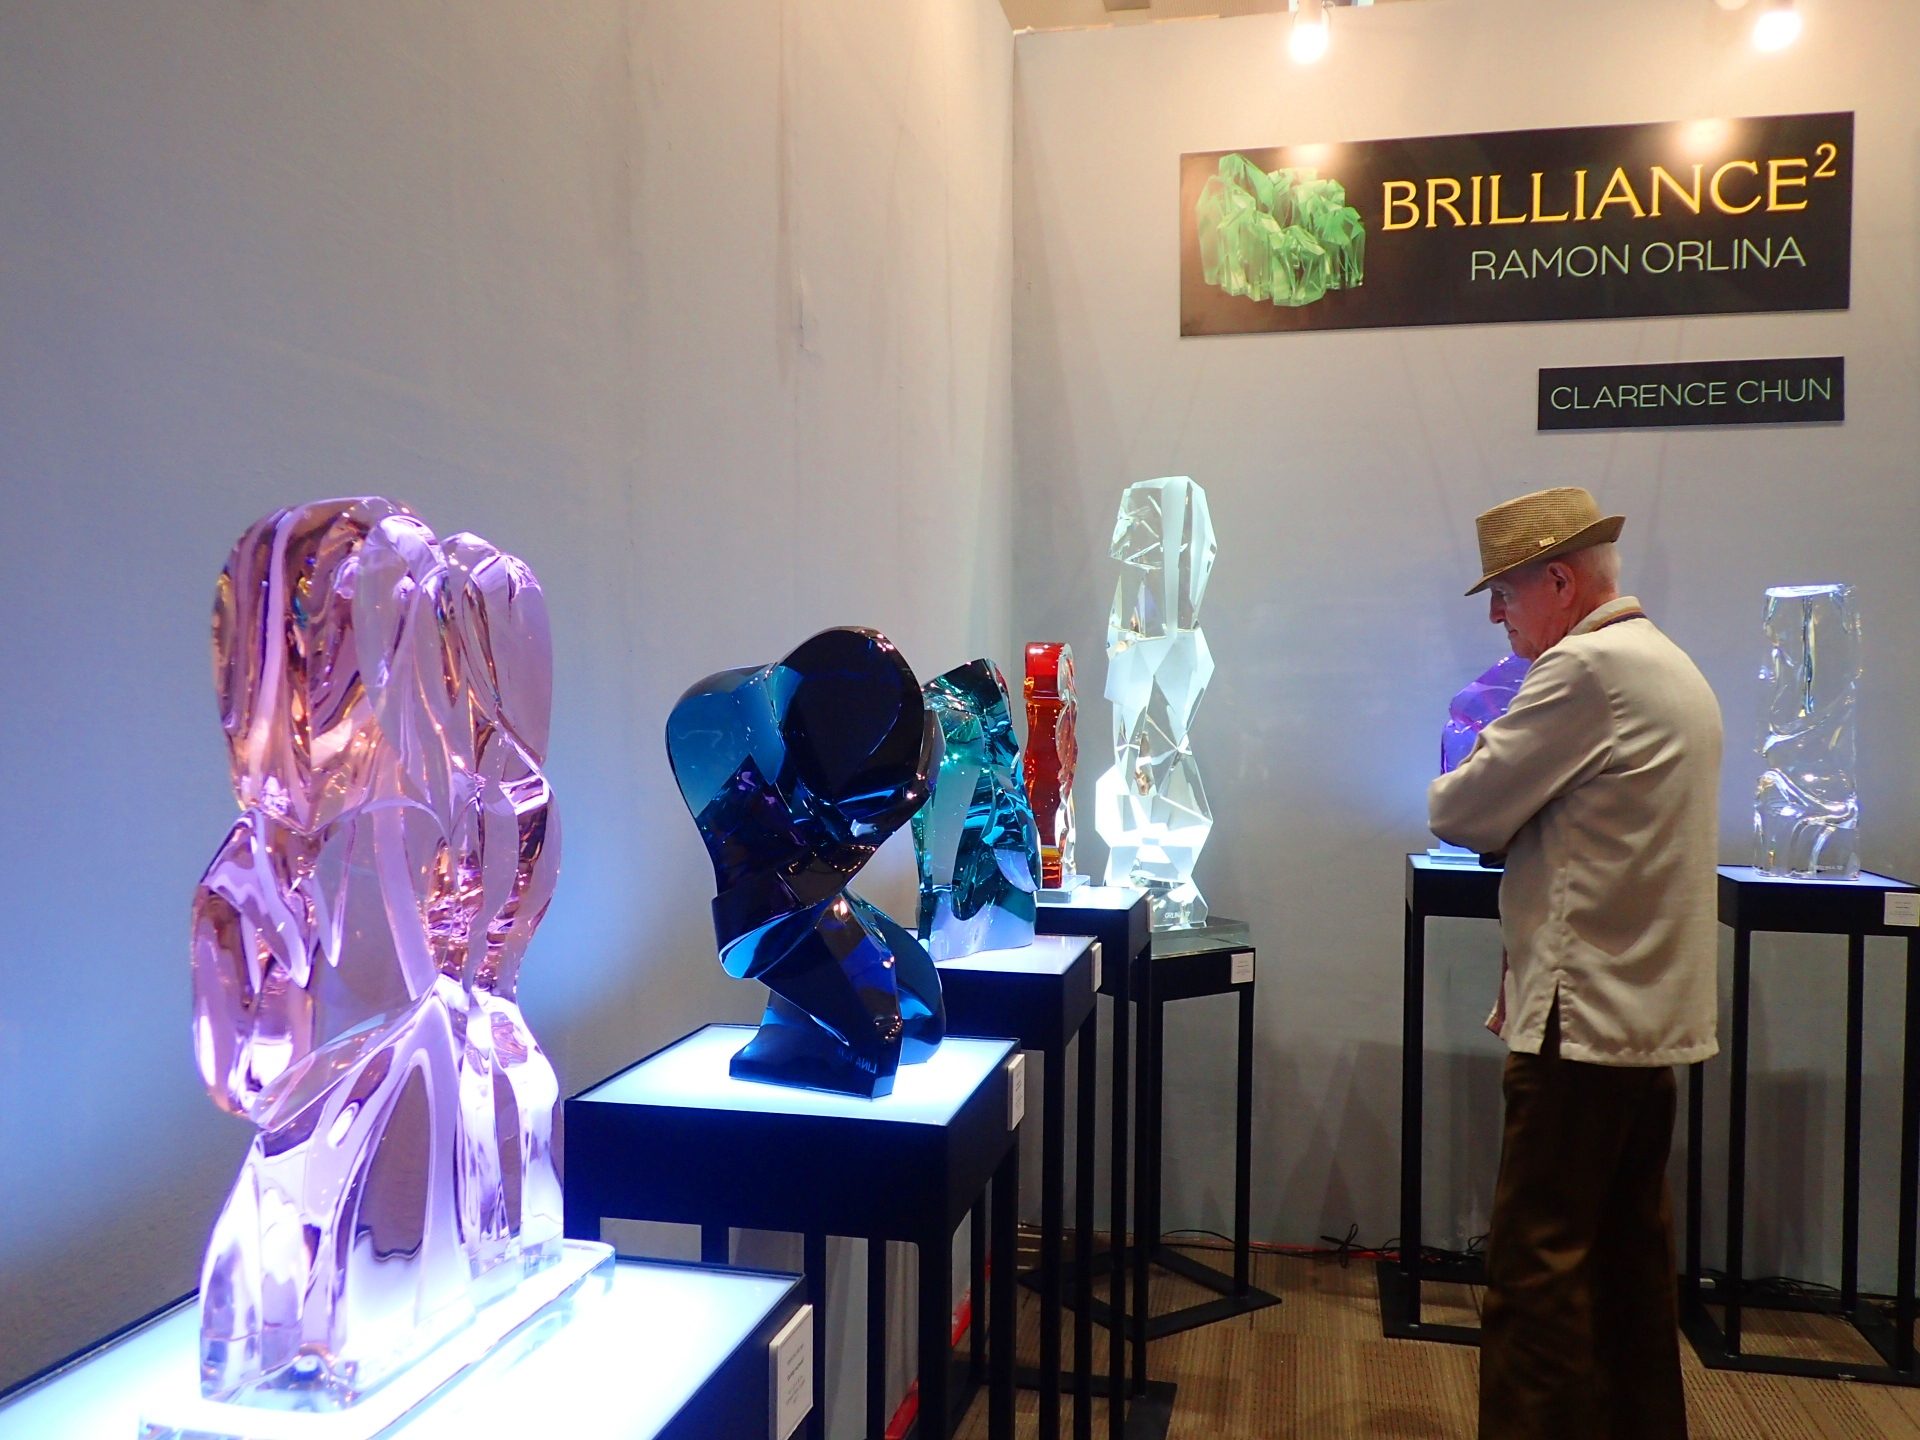 GLASS. Ramon Orlina, a well-known glass sculptor who is known for pioneering sculpting glass in its solid state, portrays different concepts like intimacy (shown by pink sculpture on the foreground) through his art. 